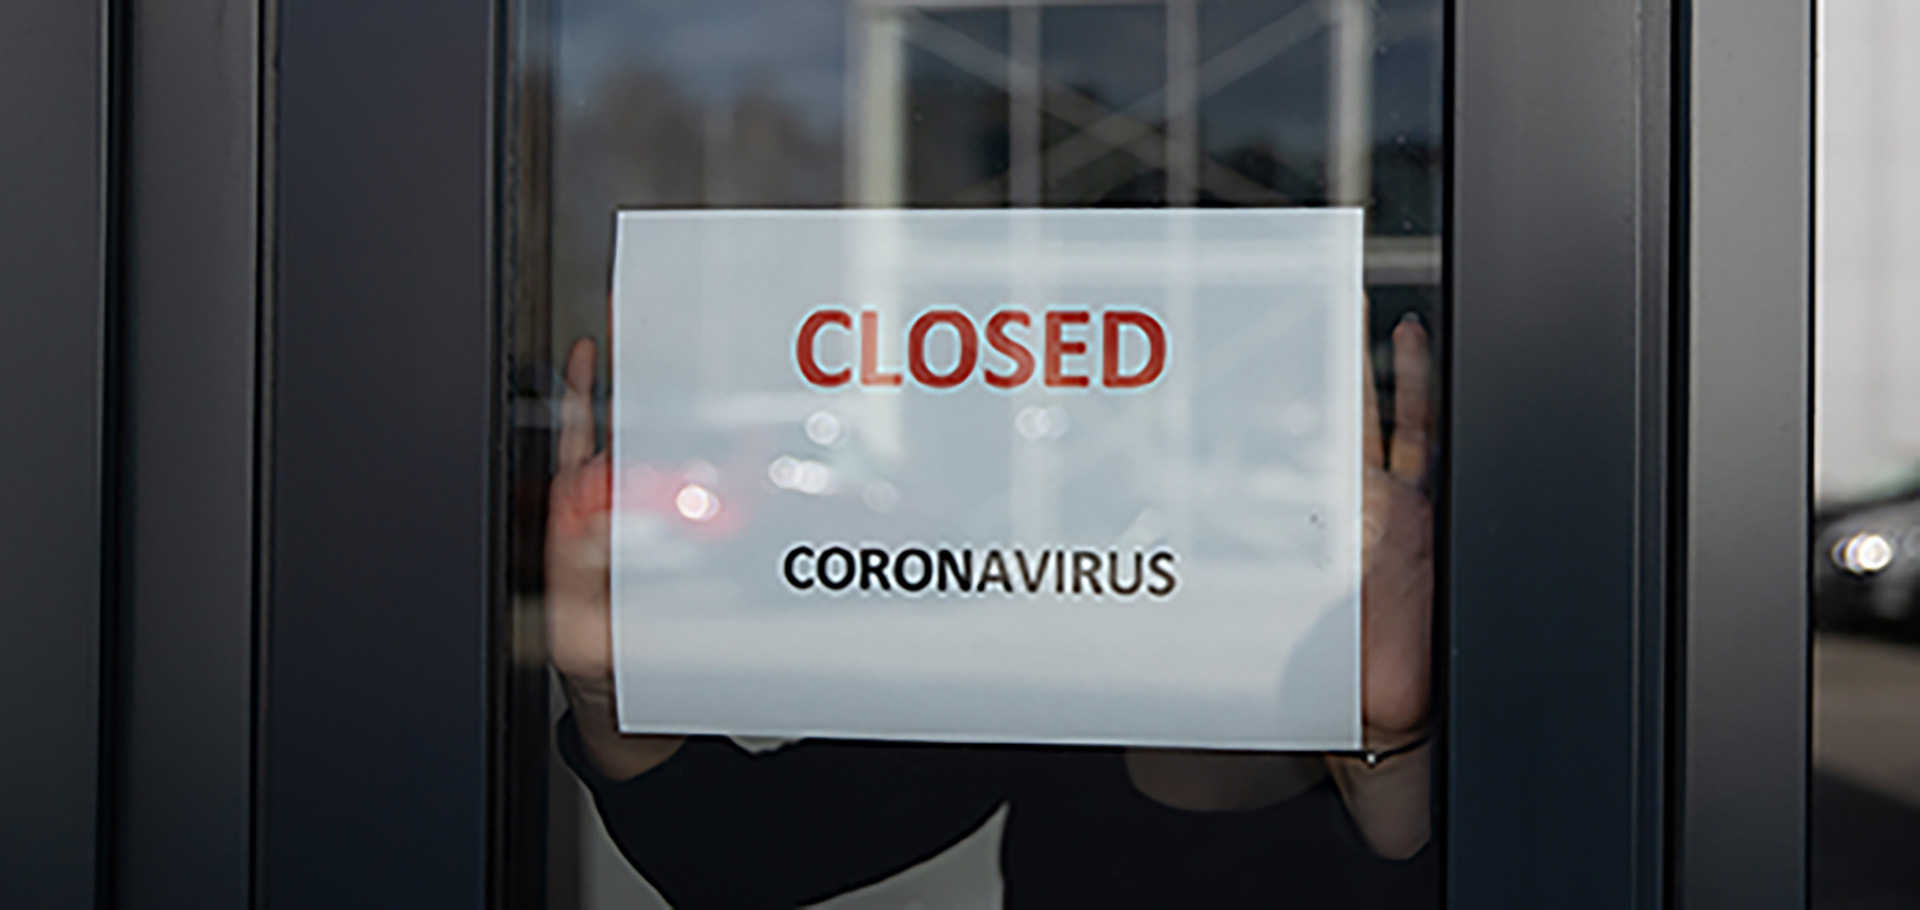 Closed because of corona. Sign in window. Closed shop.